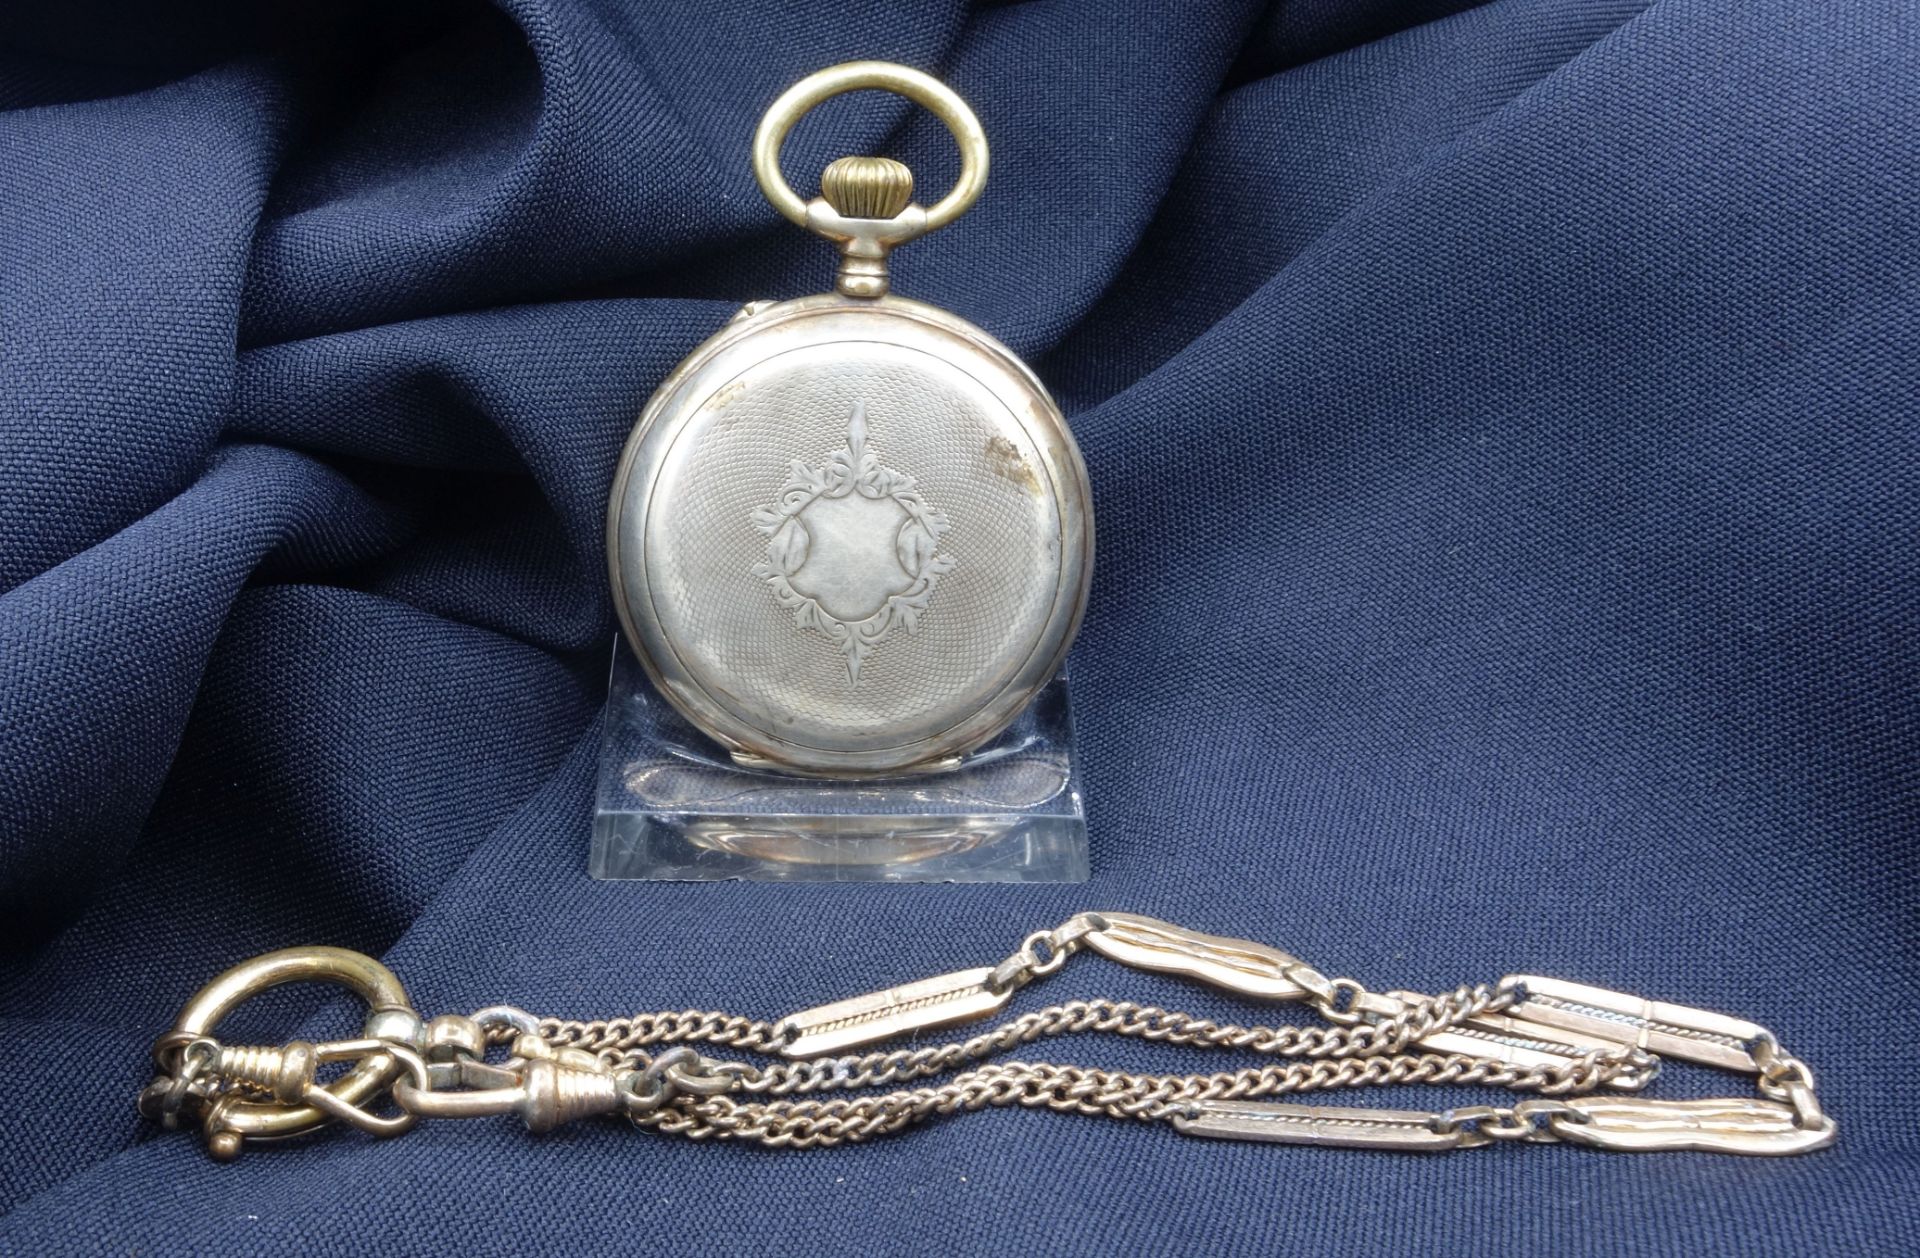 SILVER POCKET WATCH WITH POCKET WATCH CHAIN - Image 6 of 6